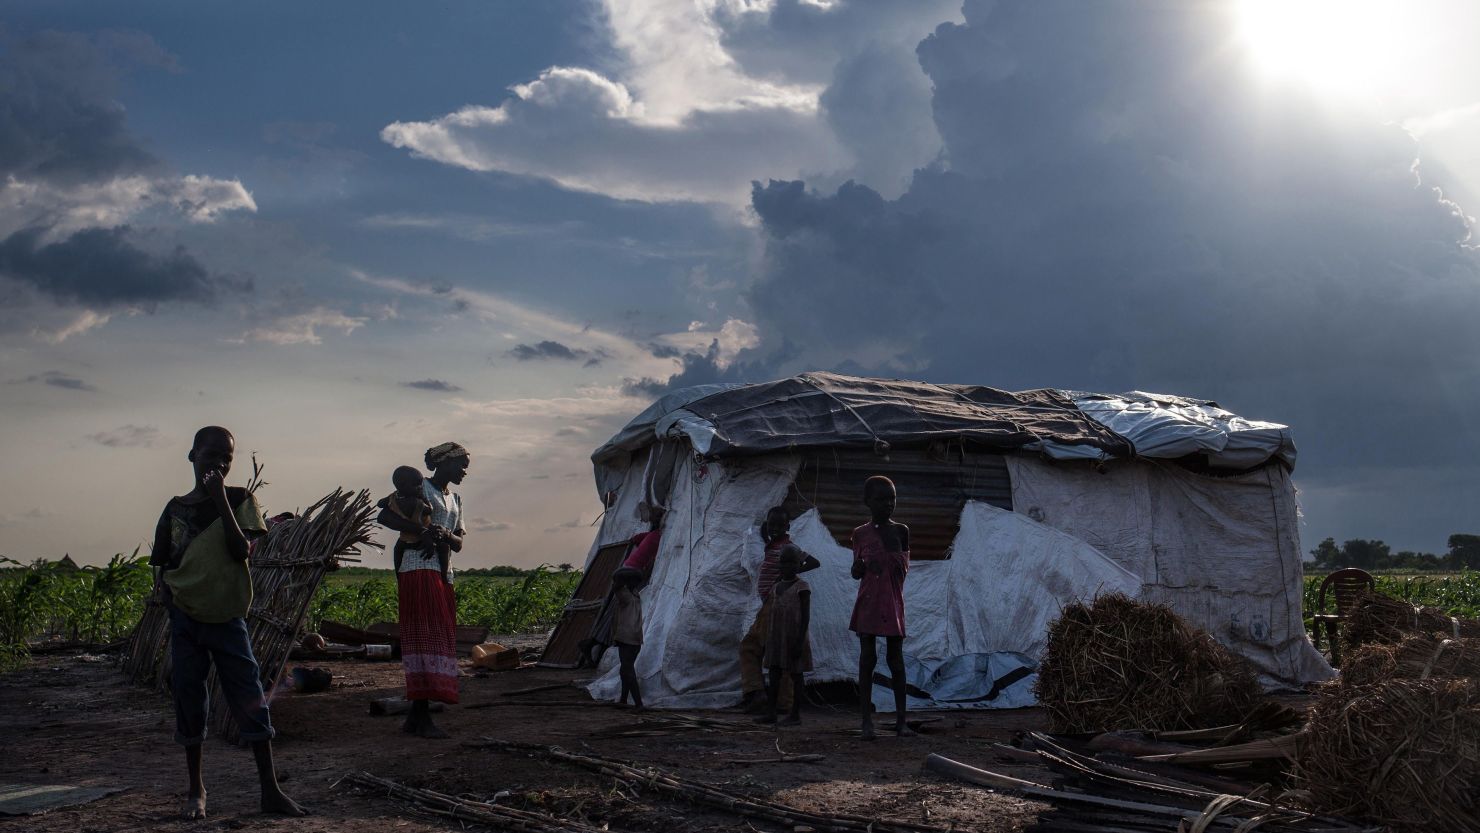 Martha Nyarueni carries one of her children outside her home near the town of Leer, South Sudan, on July 5, 2014.